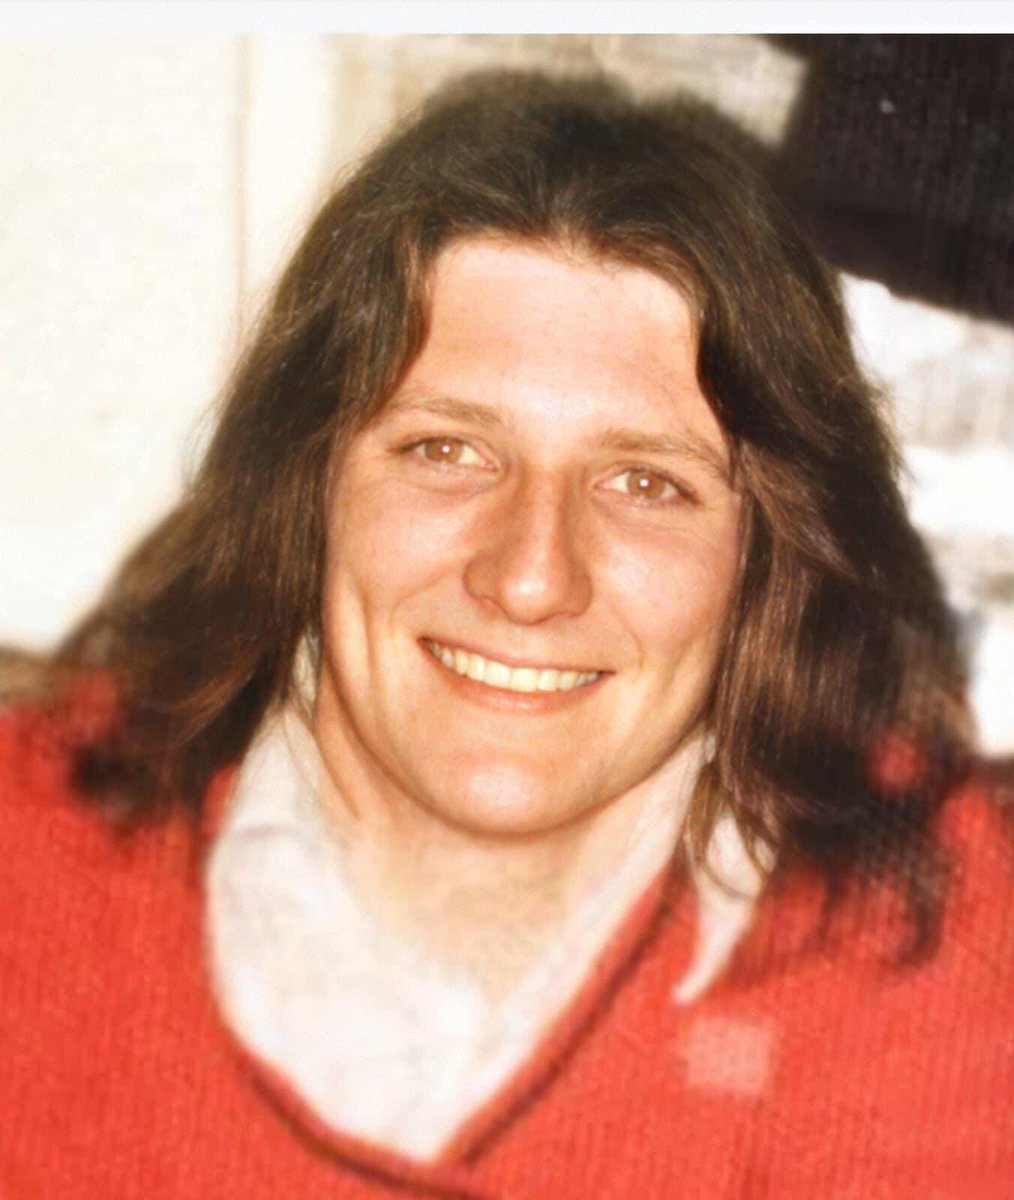 At this hour, 43 years ago, the great Bobby Sands MP dies on Hunger Strike. RIP